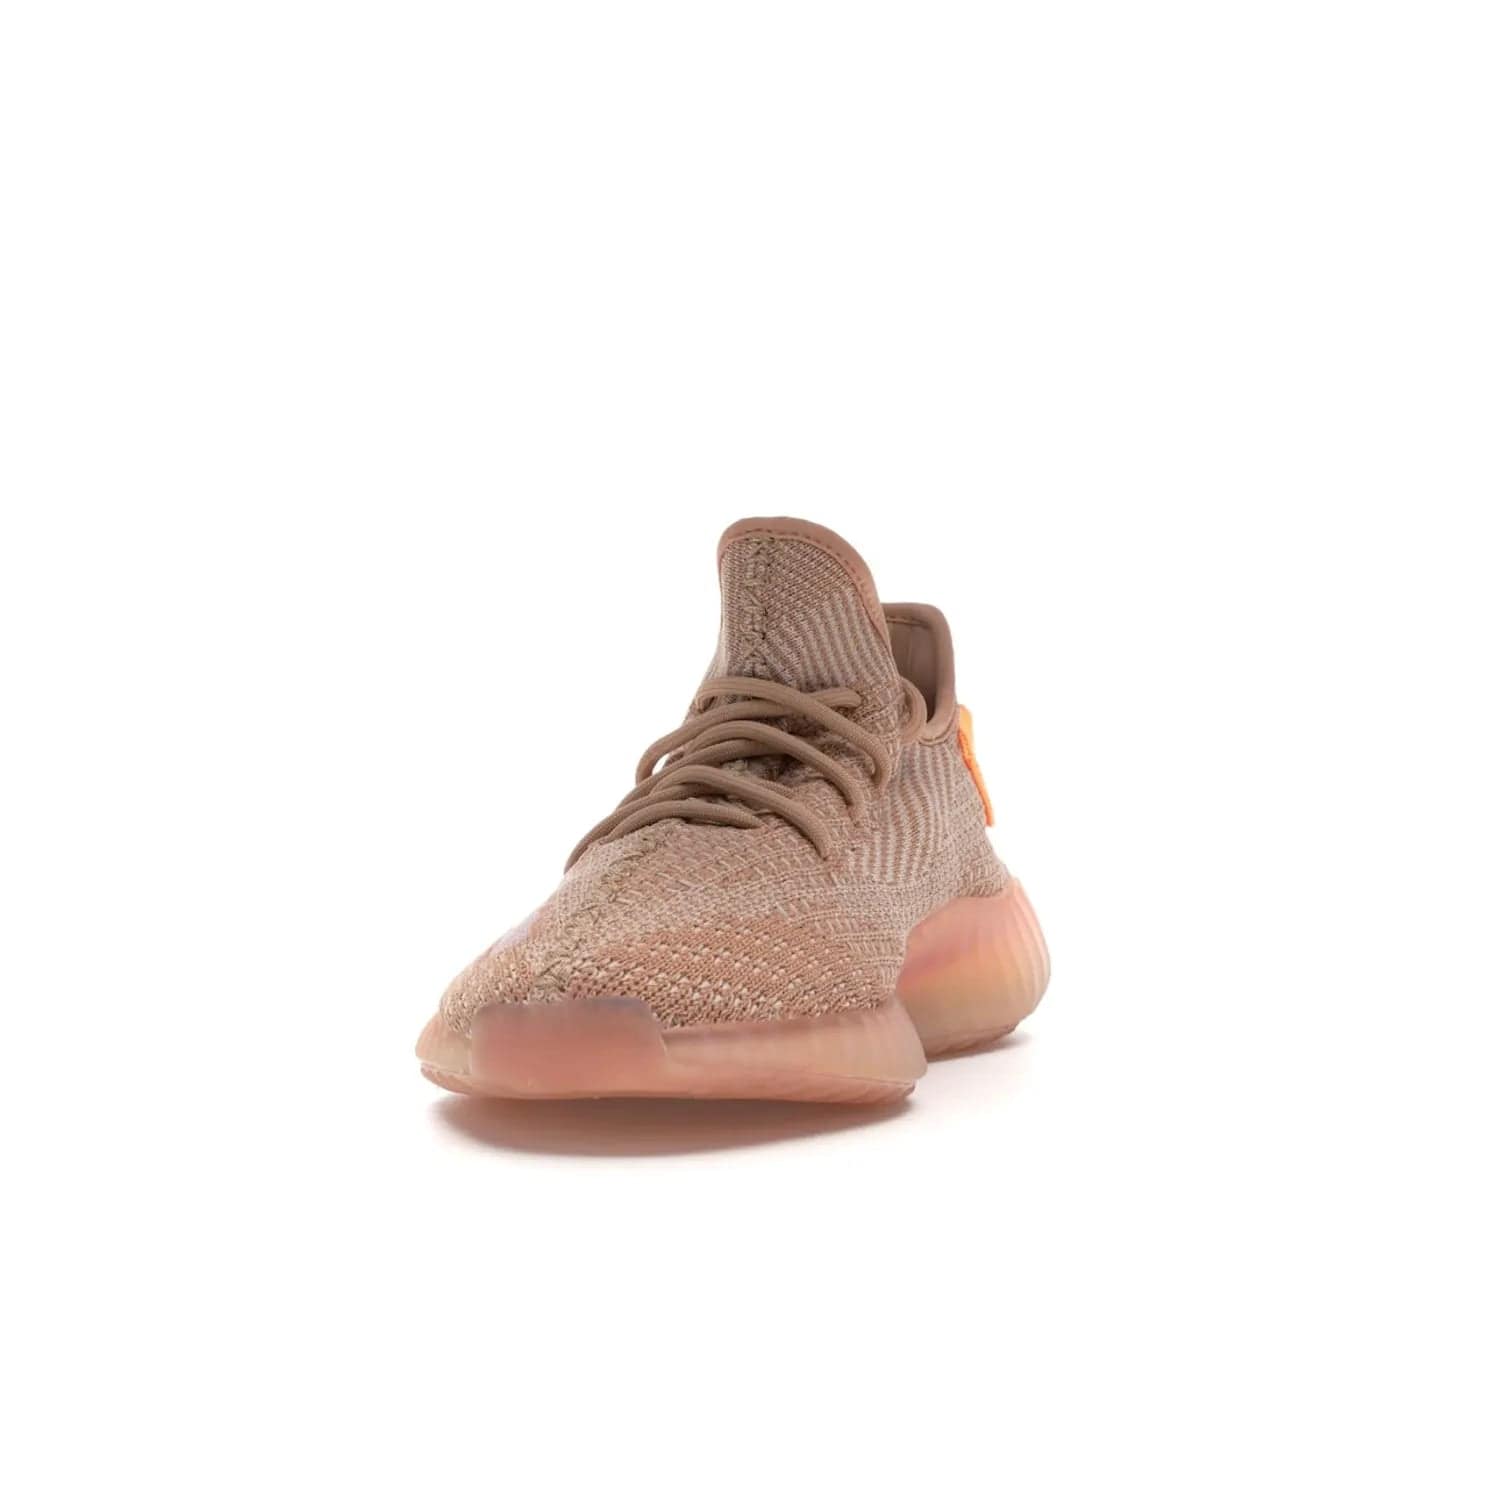 adidas Yeezy Boost 350 V2 Clay - Image 12 - Only at www.BallersClubKickz.com - The adidas Yeezy Boost 350 V2 Clay - style and swag in one shoe. Orange accents, clay midsole and sole. Get yours today!